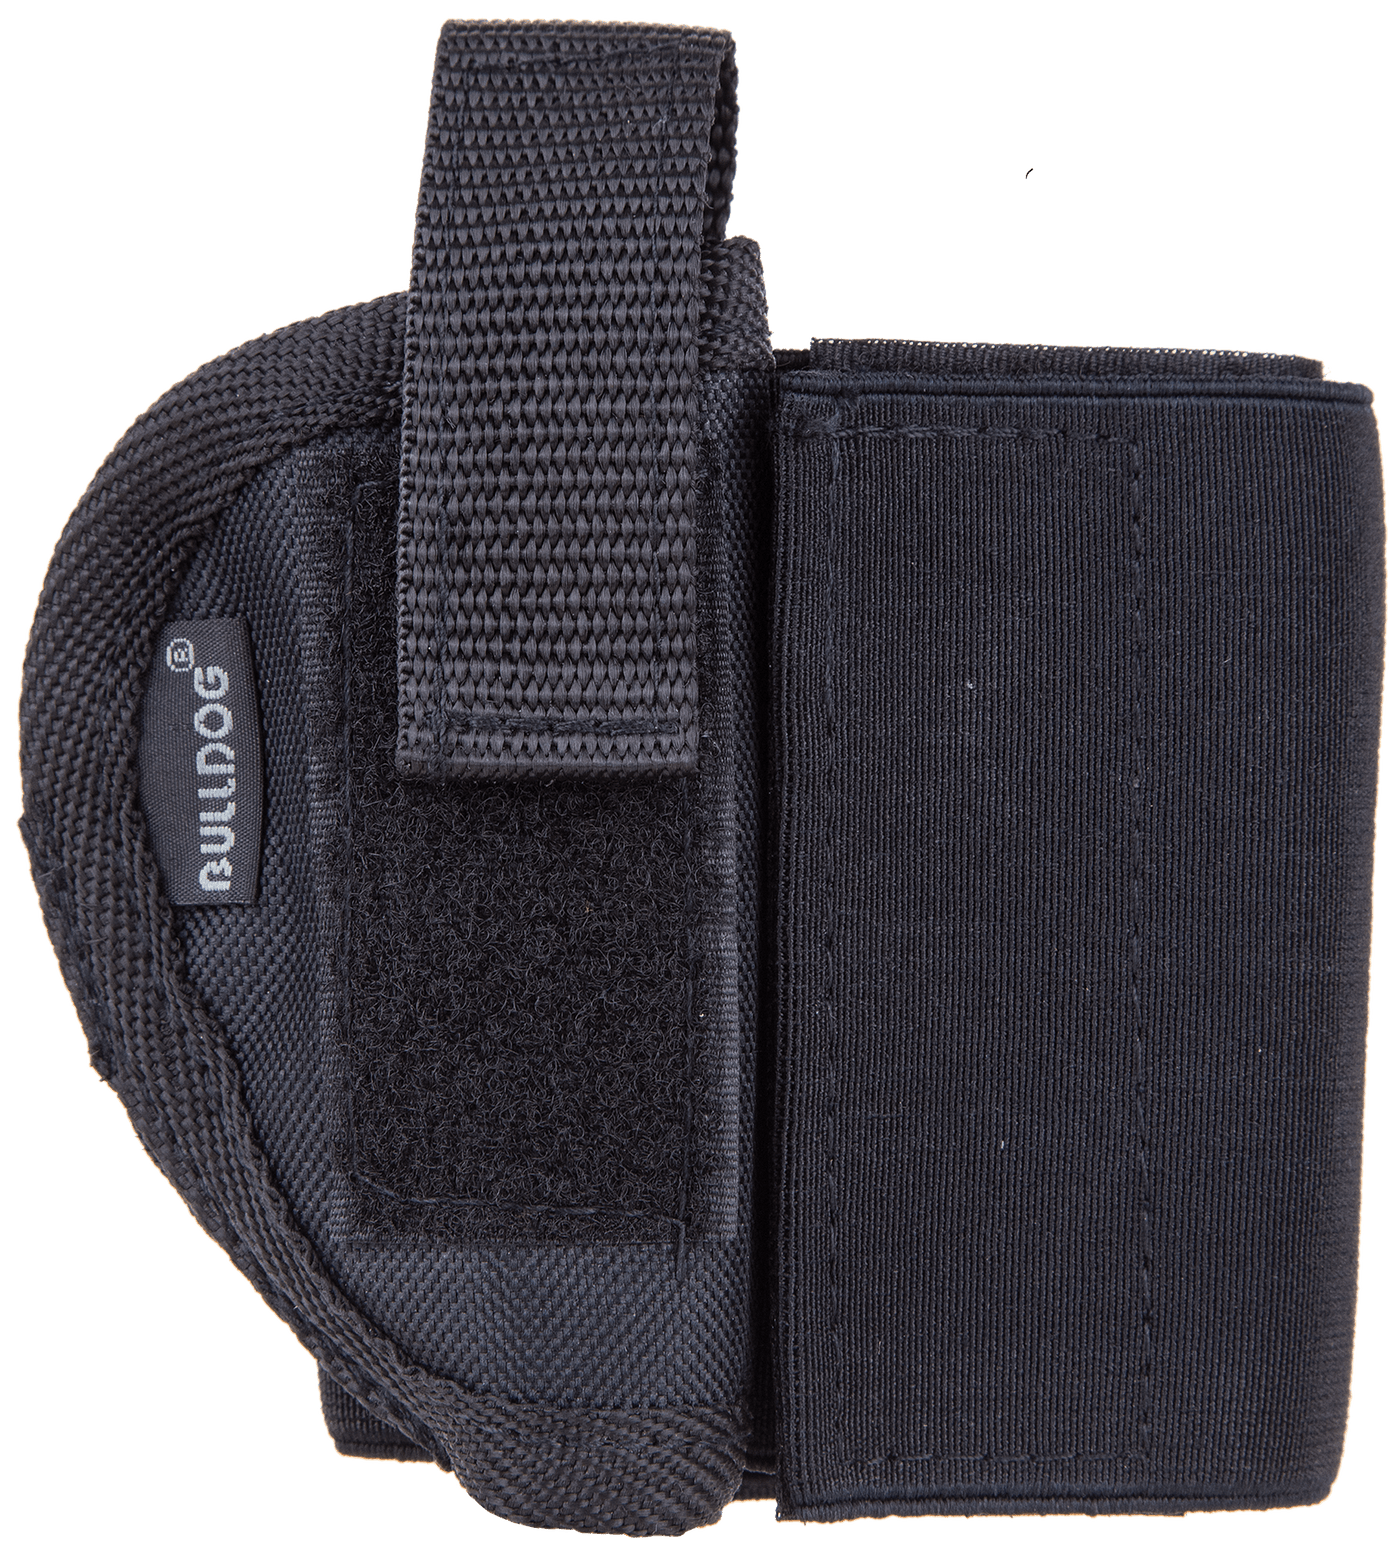 Bulldog Bulldog Ankle Holster Rh Black - Most Revolvers 2"-2 1/2" Bbl Holsters And Related Items